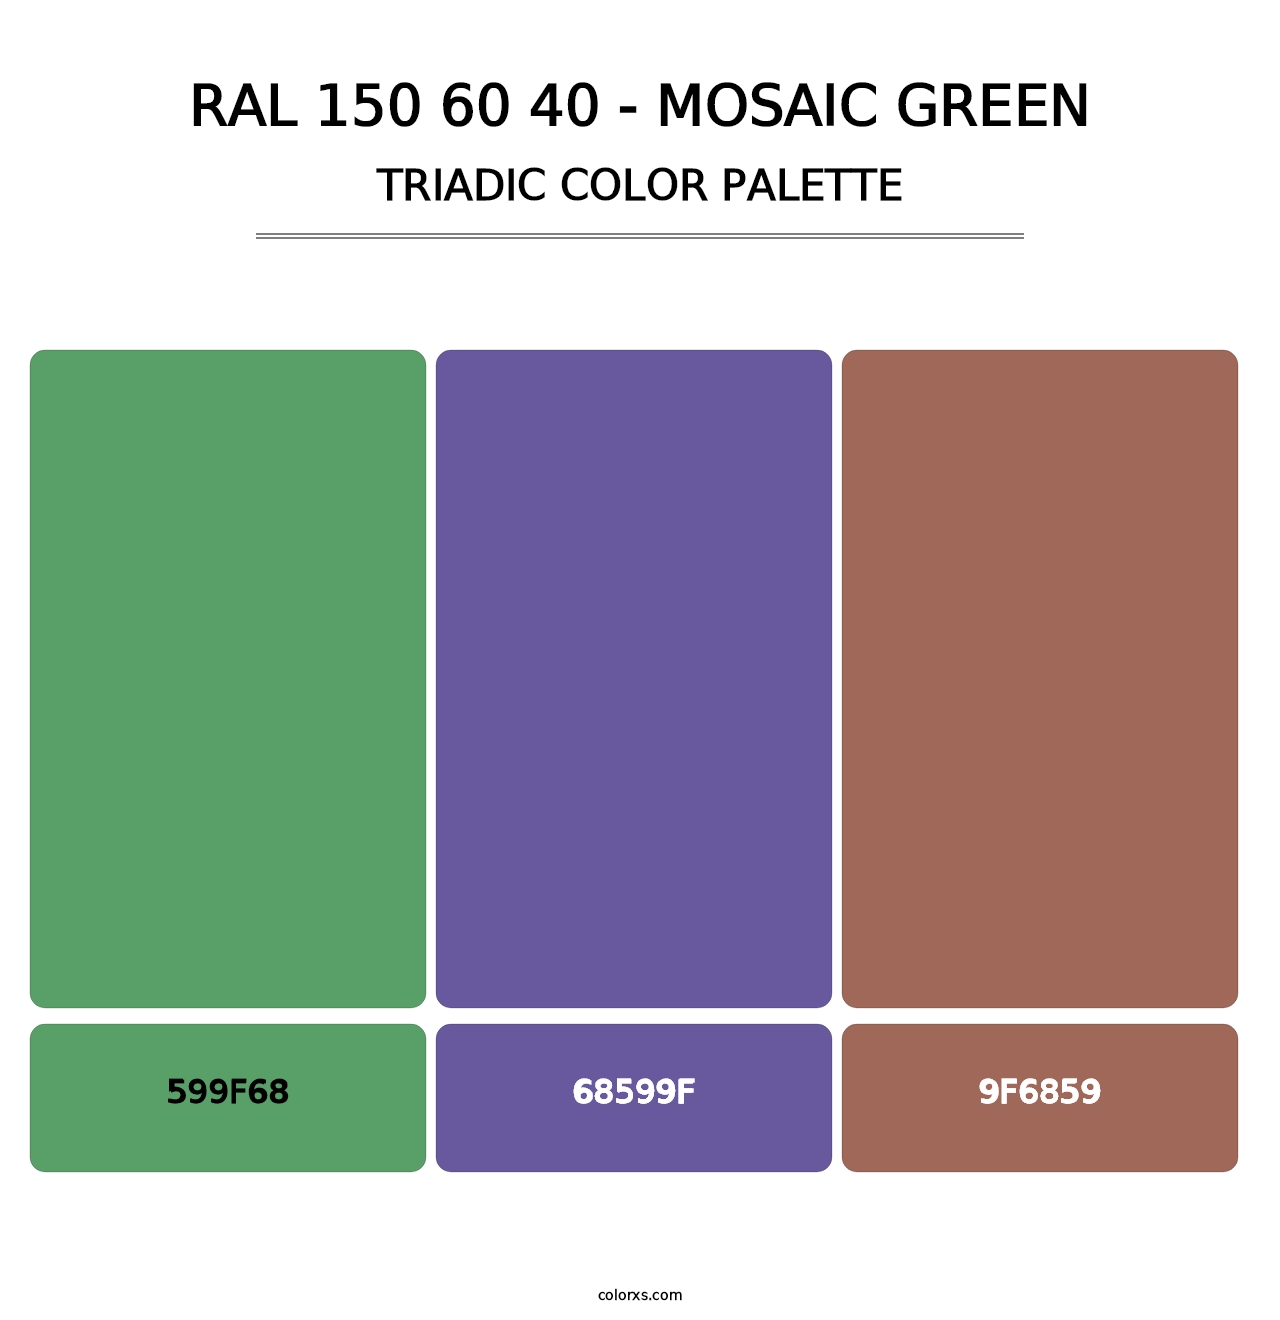 RAL 150 60 40 - Mosaic Green - Triadic Color Palette